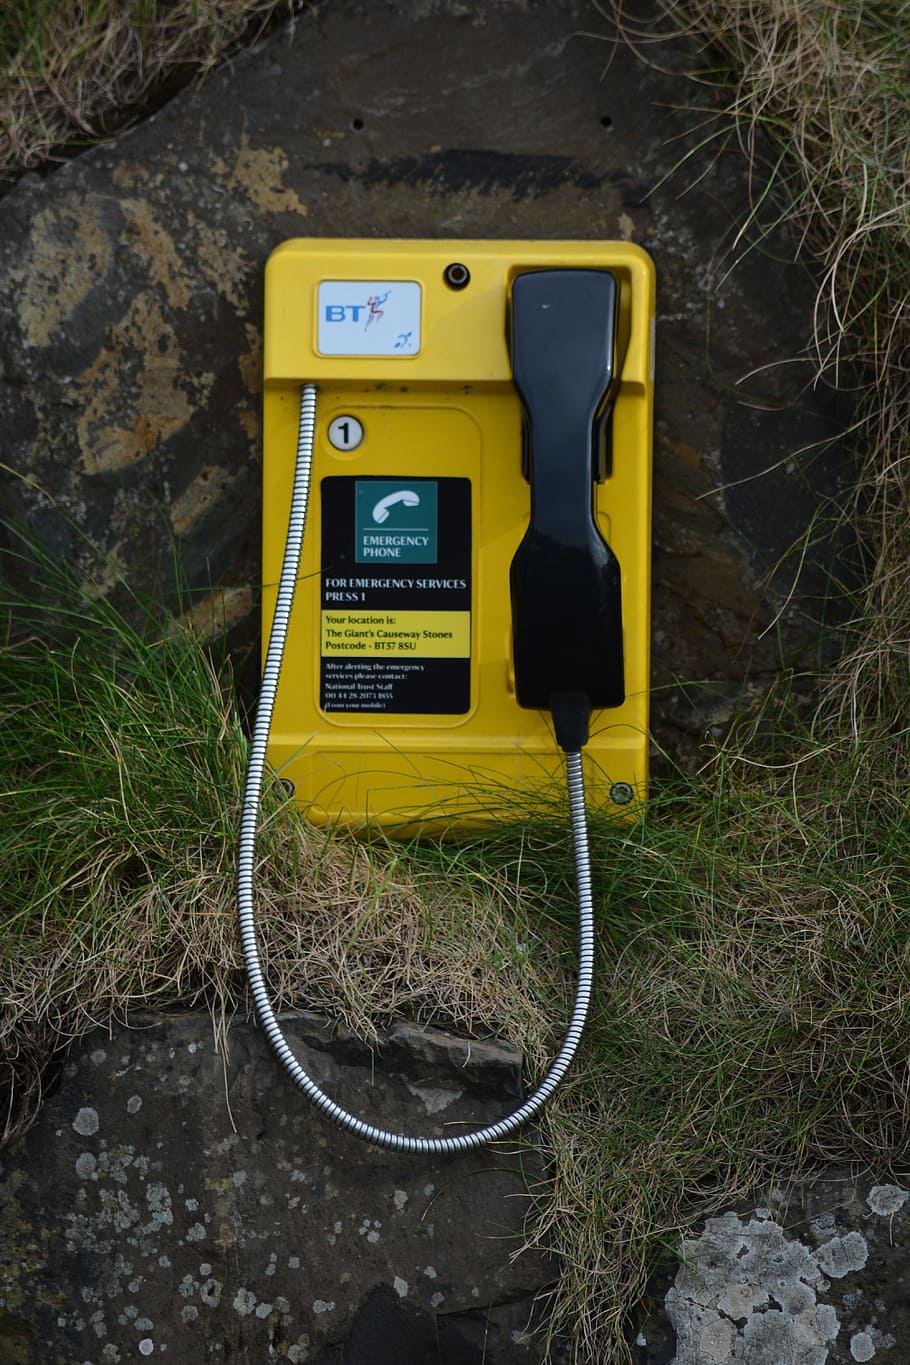 Technology, Phone, Communication, giant causeway, iralnd, telephone, connection, old-fashioned, pay phone, fuel pump